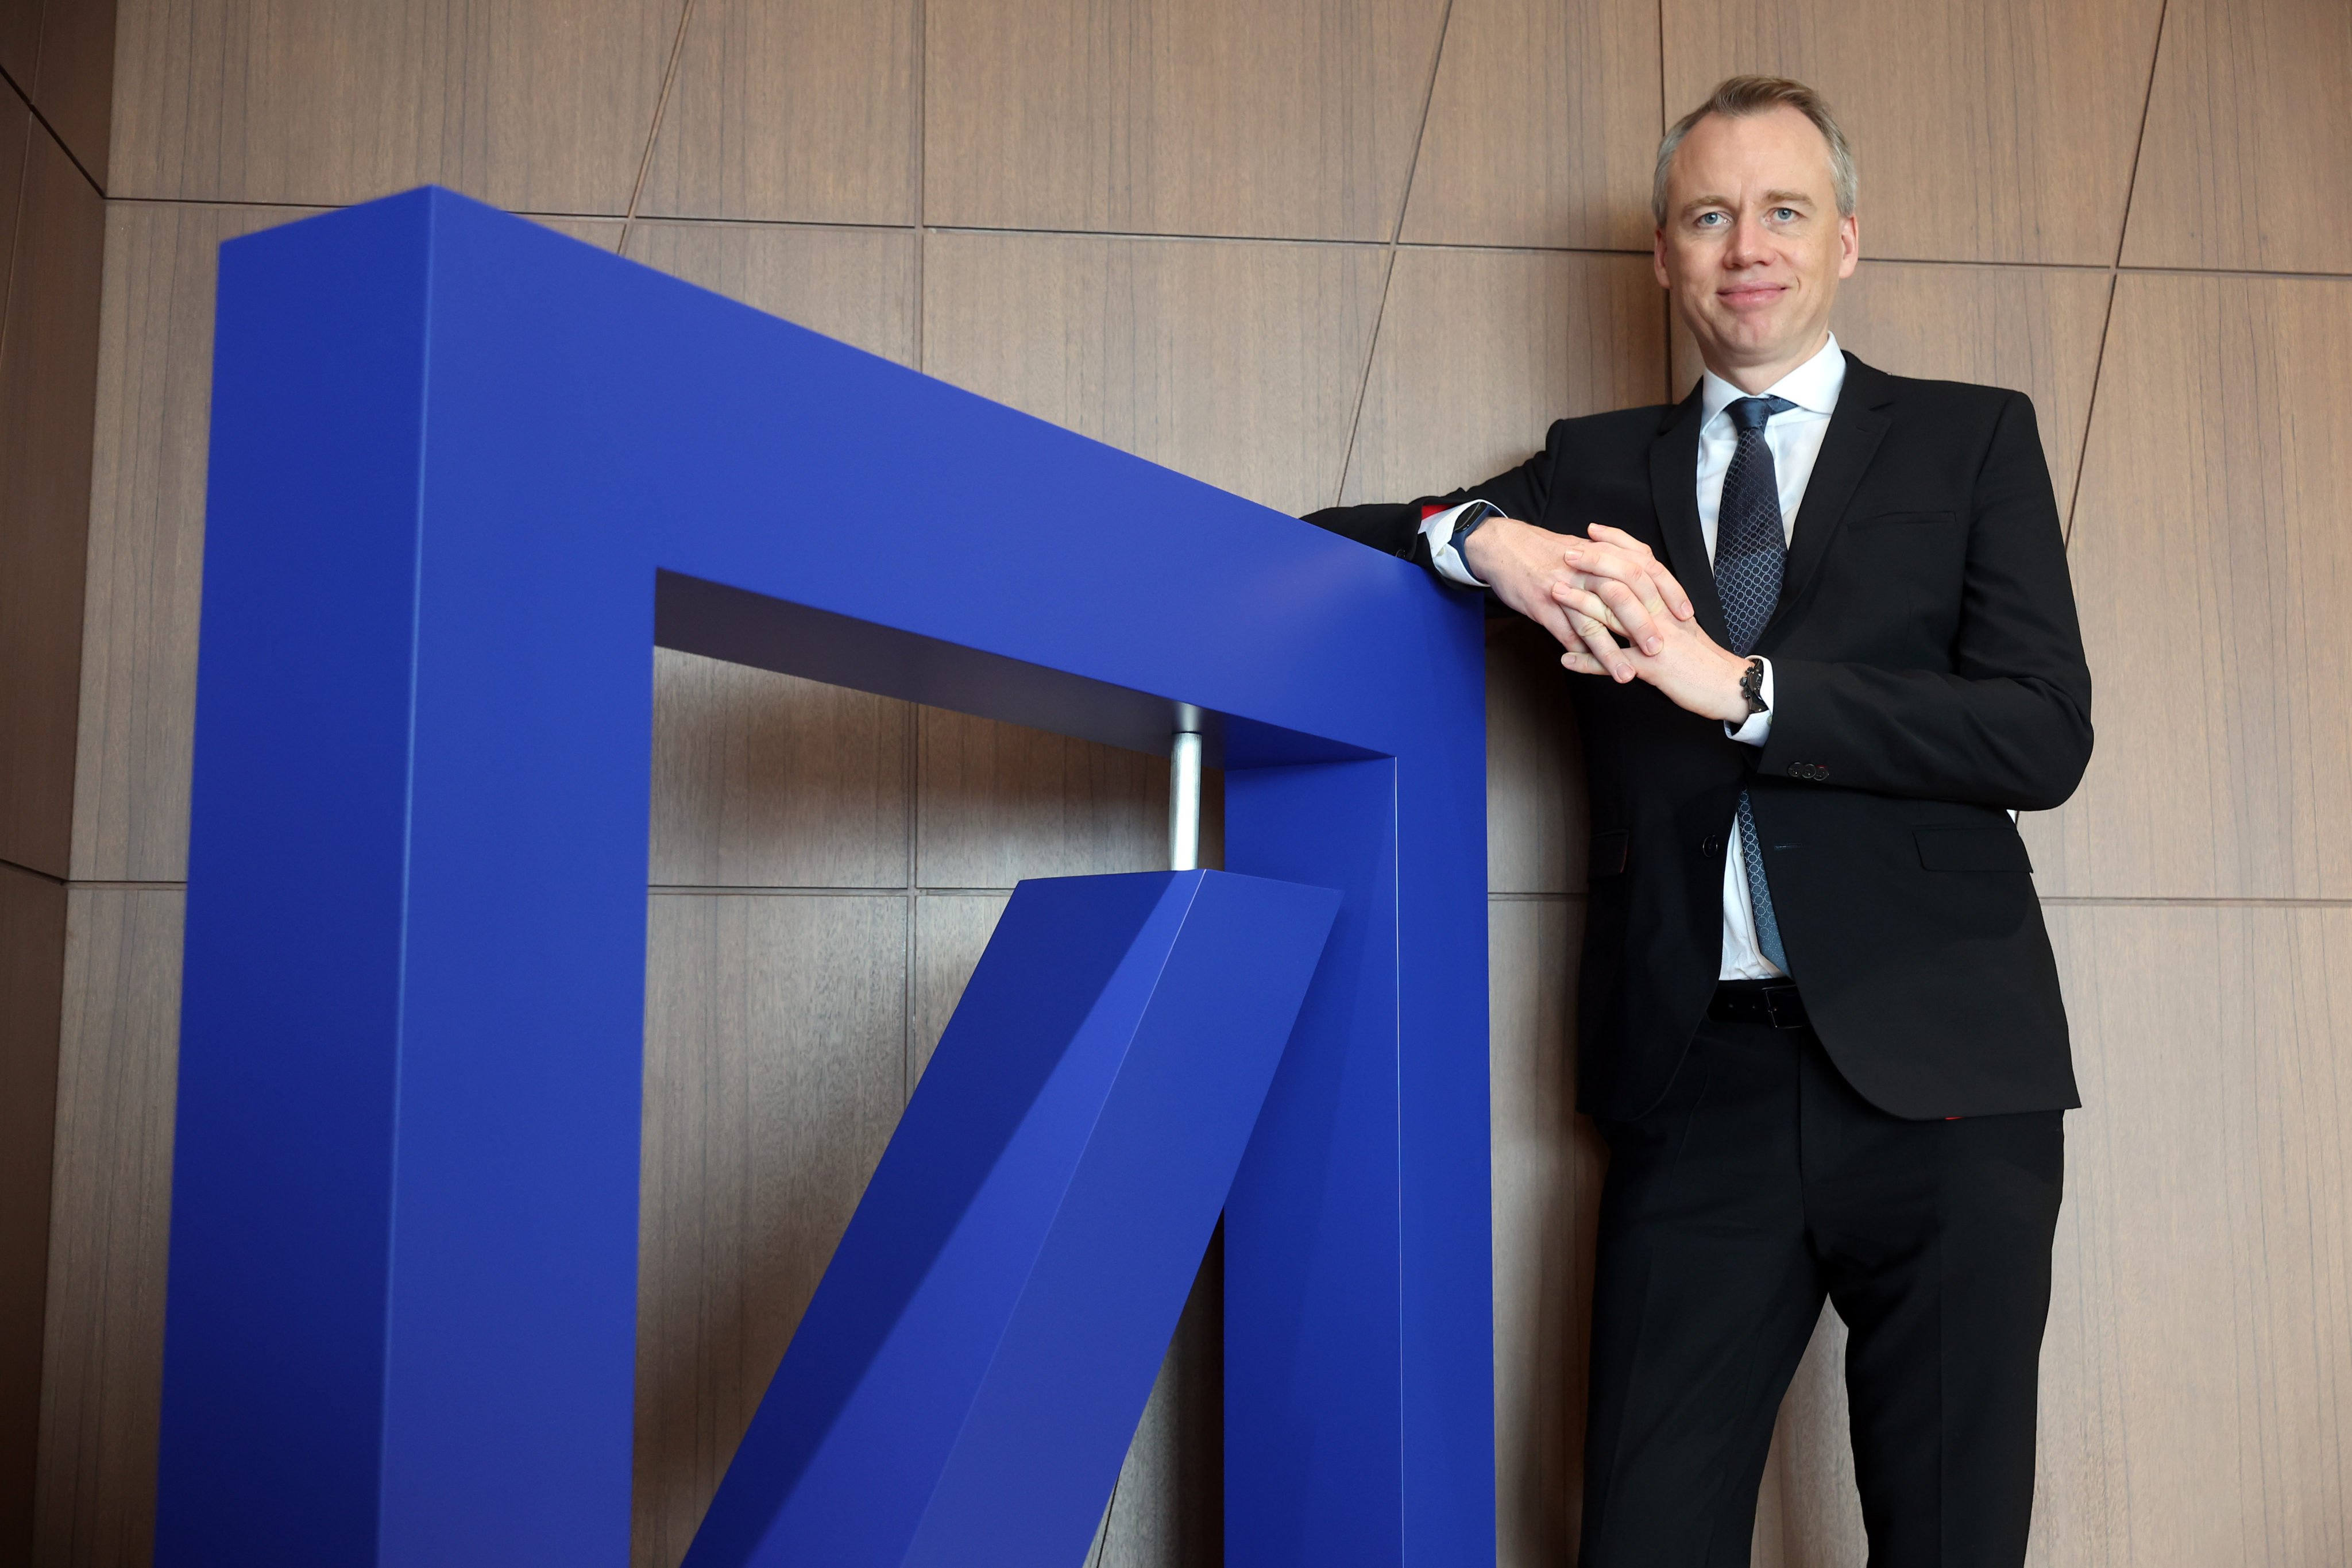 Alexander von zur Muehlen Deutsche Bank
CEO for Asia Pacific, Europe, Middle East & Africa, and Germany, poses for a picture at ICC in West Kowloon. Photo: Edmond So